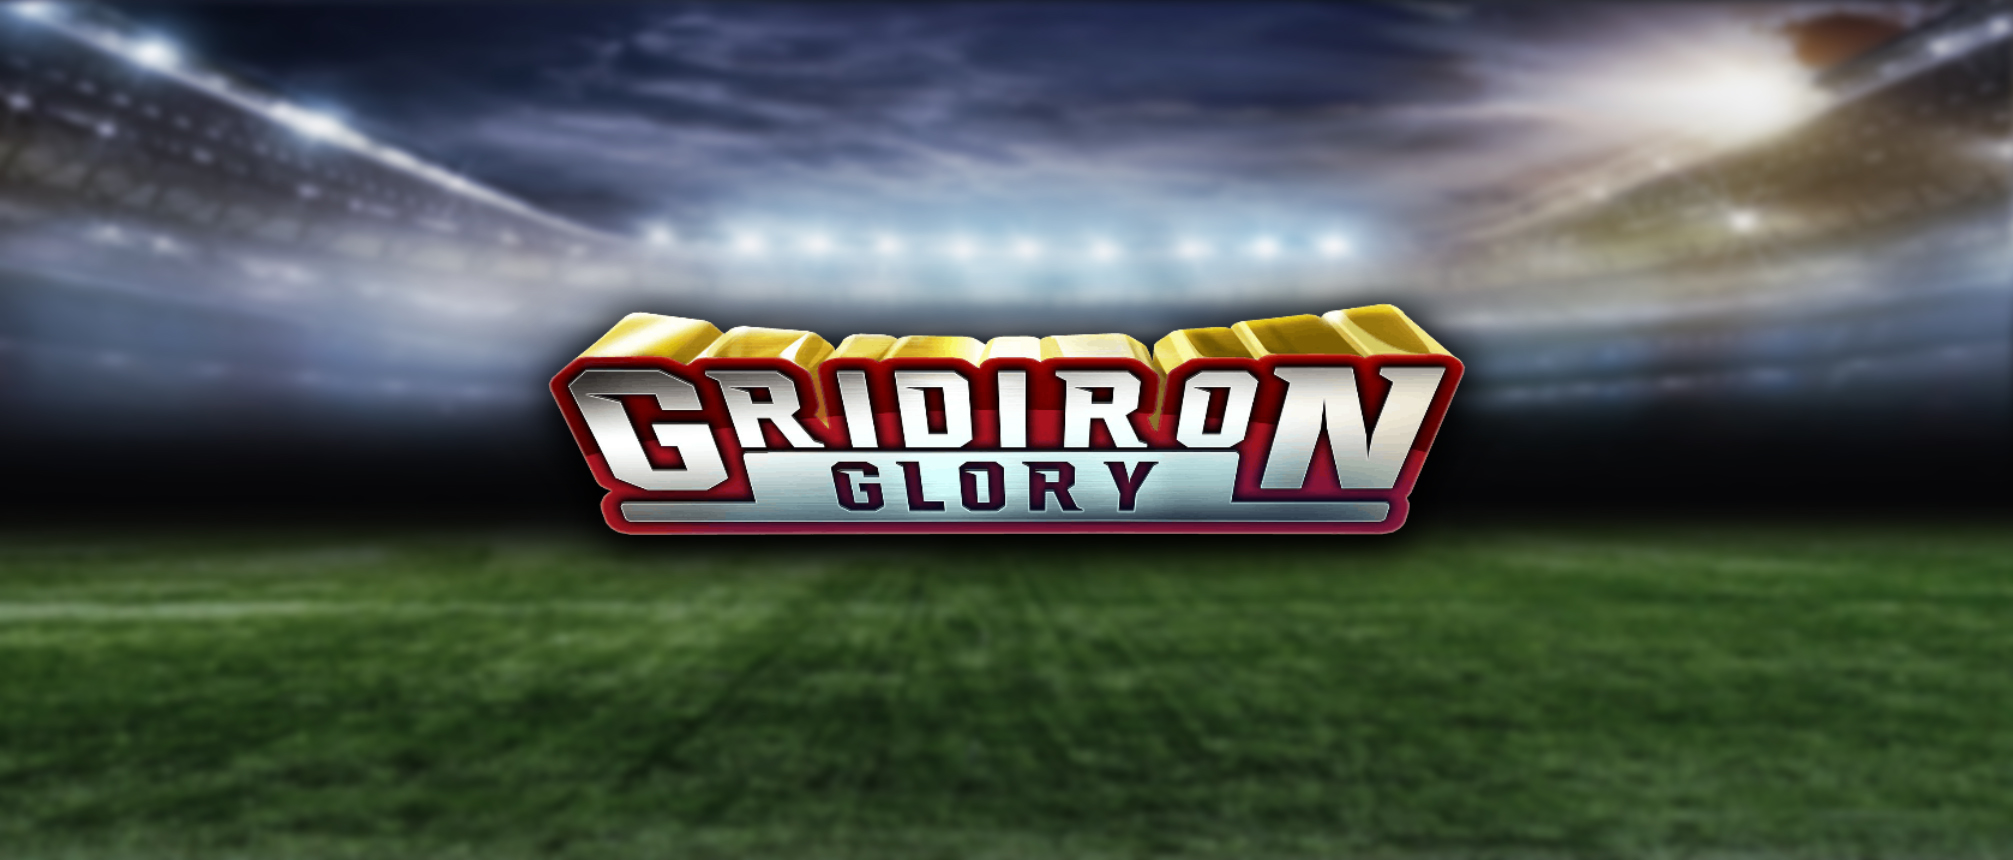 Not only is Bodog the number one place to go for sports betting in Canada, but we also know a thing or two about bringing the sports to life in slot games. Check out our review on Gridiron Glory.